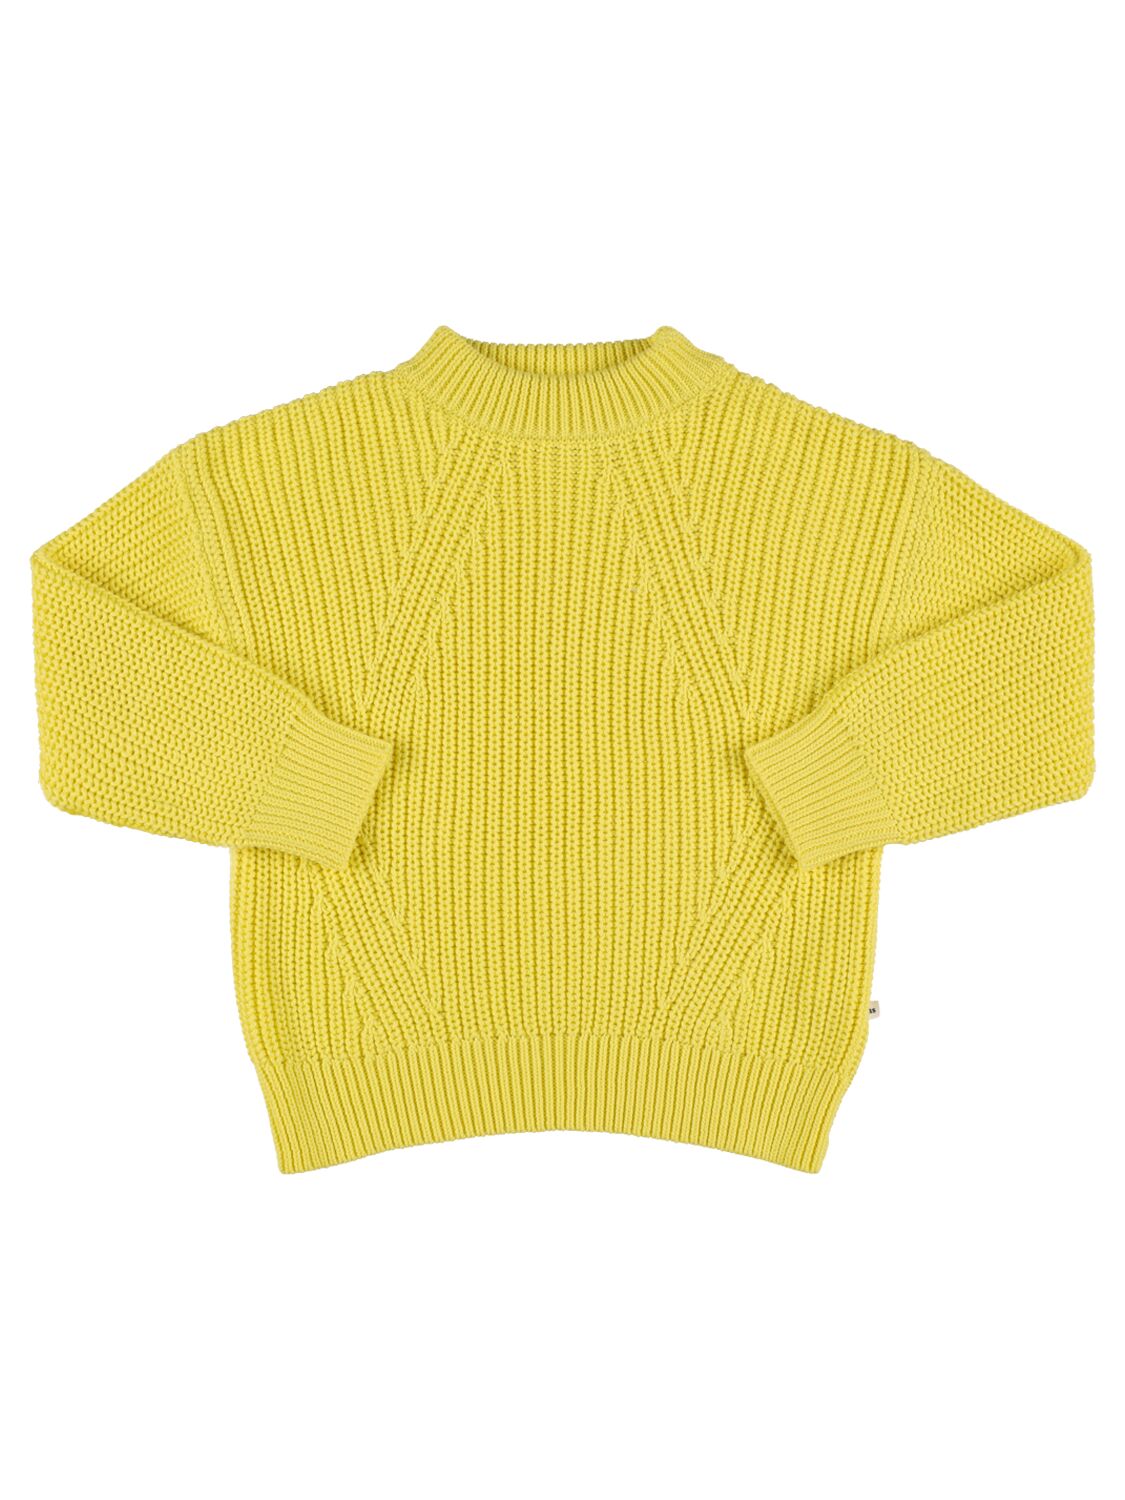 The New Society Kids' Organic Cotton Knit Sweater In Yellow